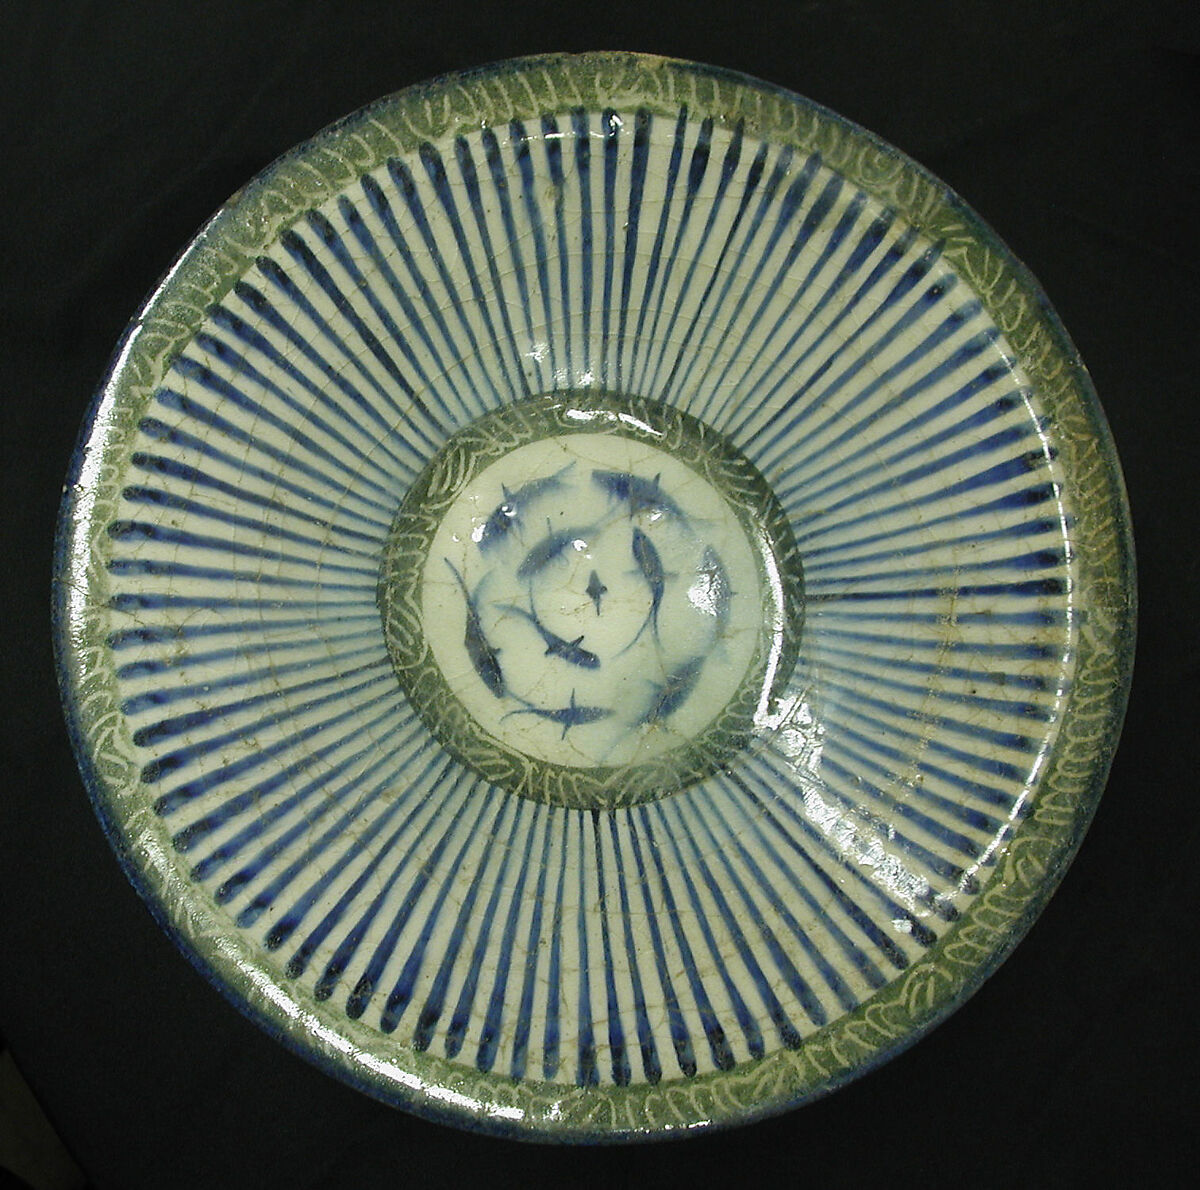 Bowl with Central Fish Motif, Stonepaste; incised and polychrome painted under transparent glaze 